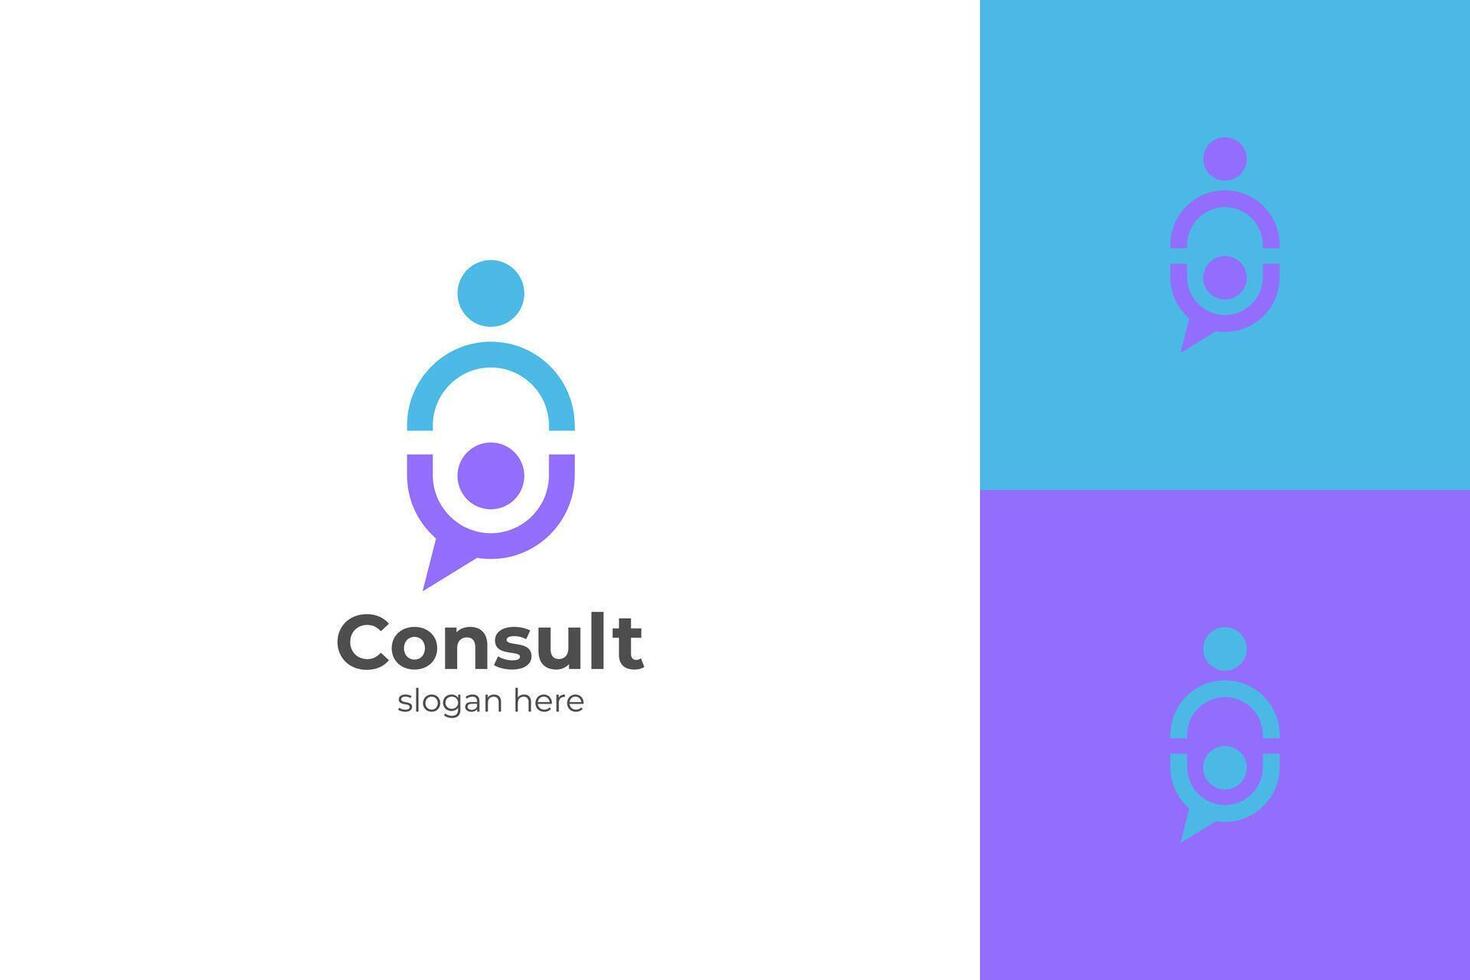 people consultant leadership logo icon design. with bubble chat conversation graphic symbol. friendship logo template vector